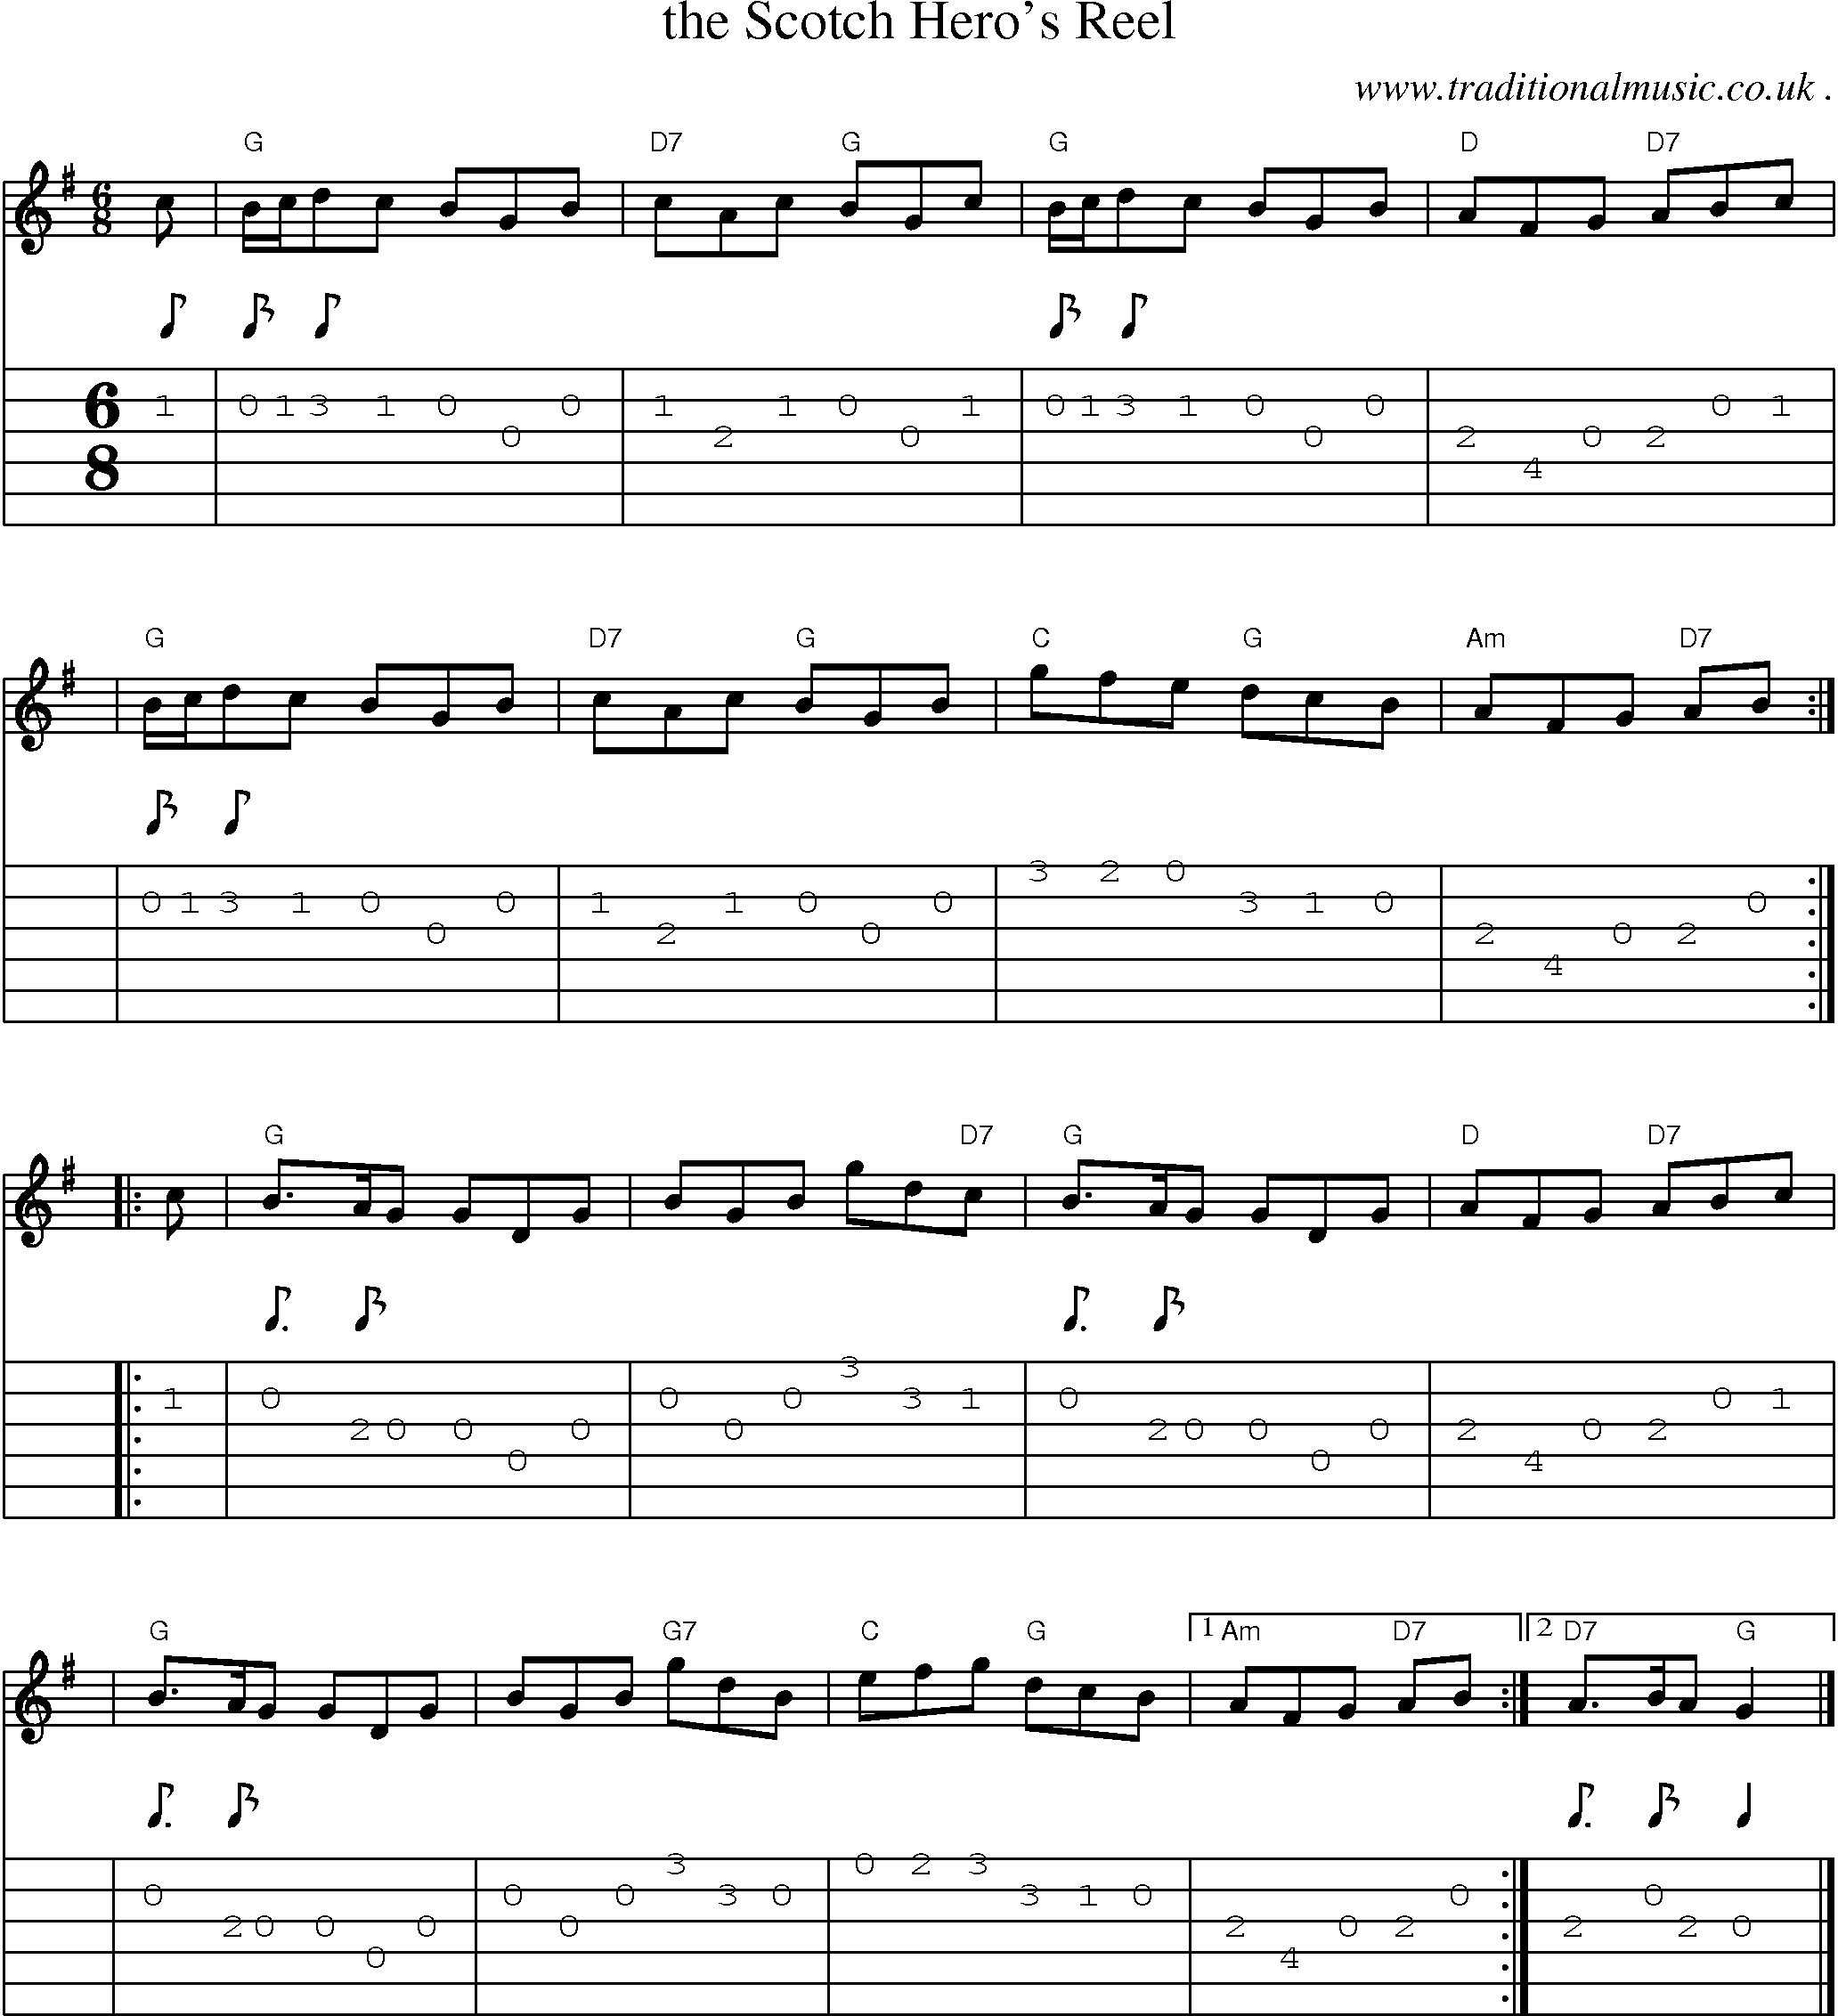 Sheet-music  score, Chords and Guitar Tabs for The Scotch Heros Reel